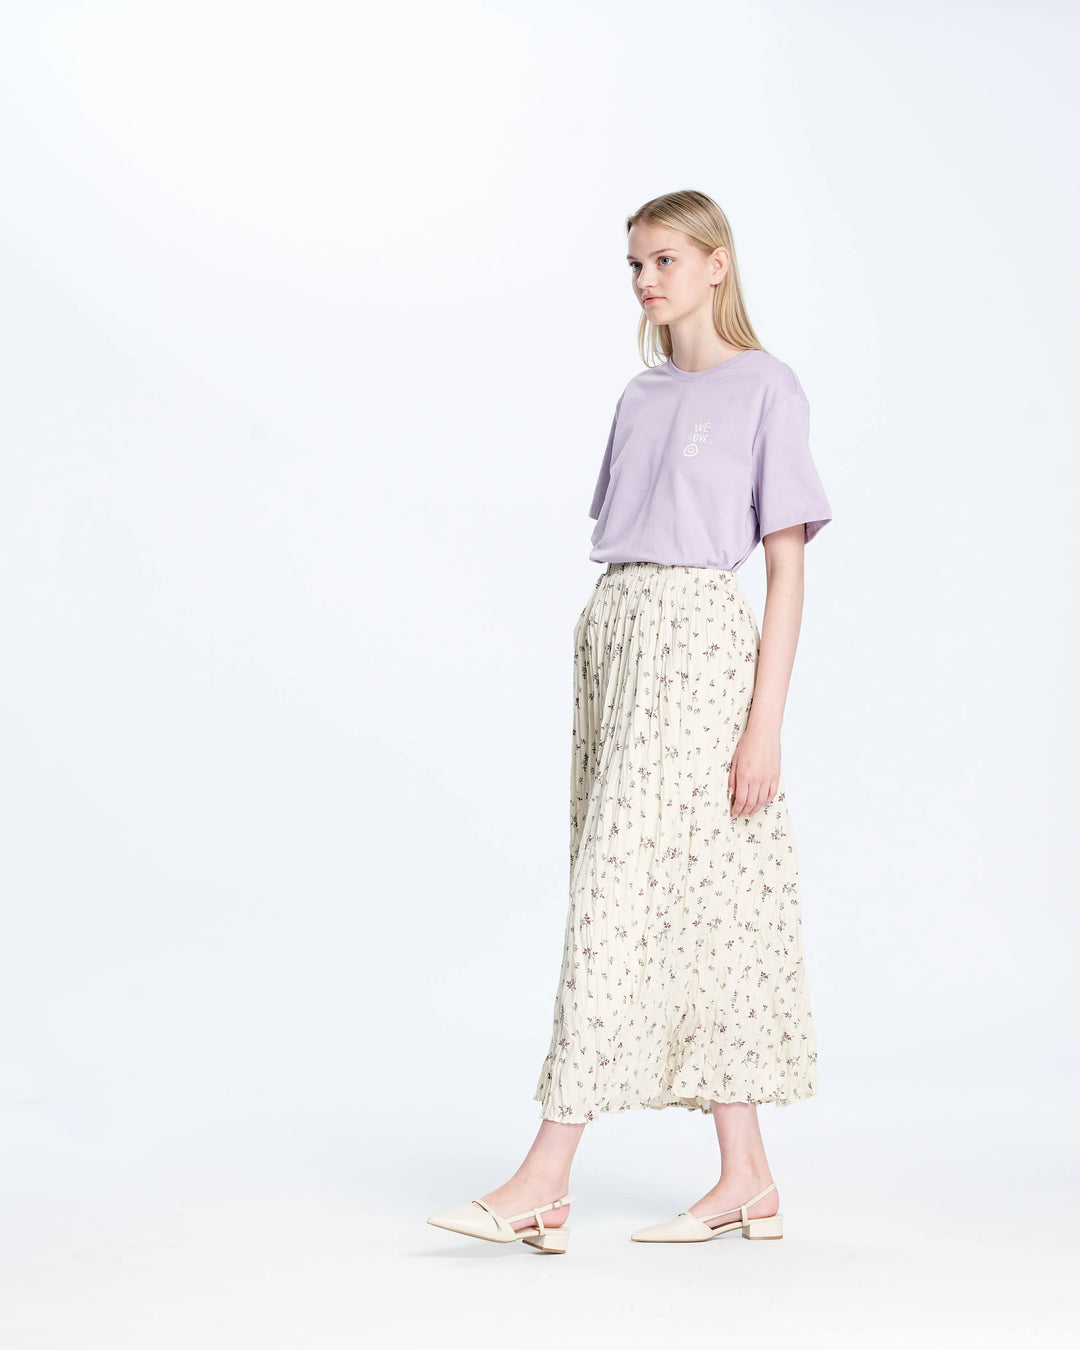 An image of a   26060 Floral Skirt by  Mirra Masa